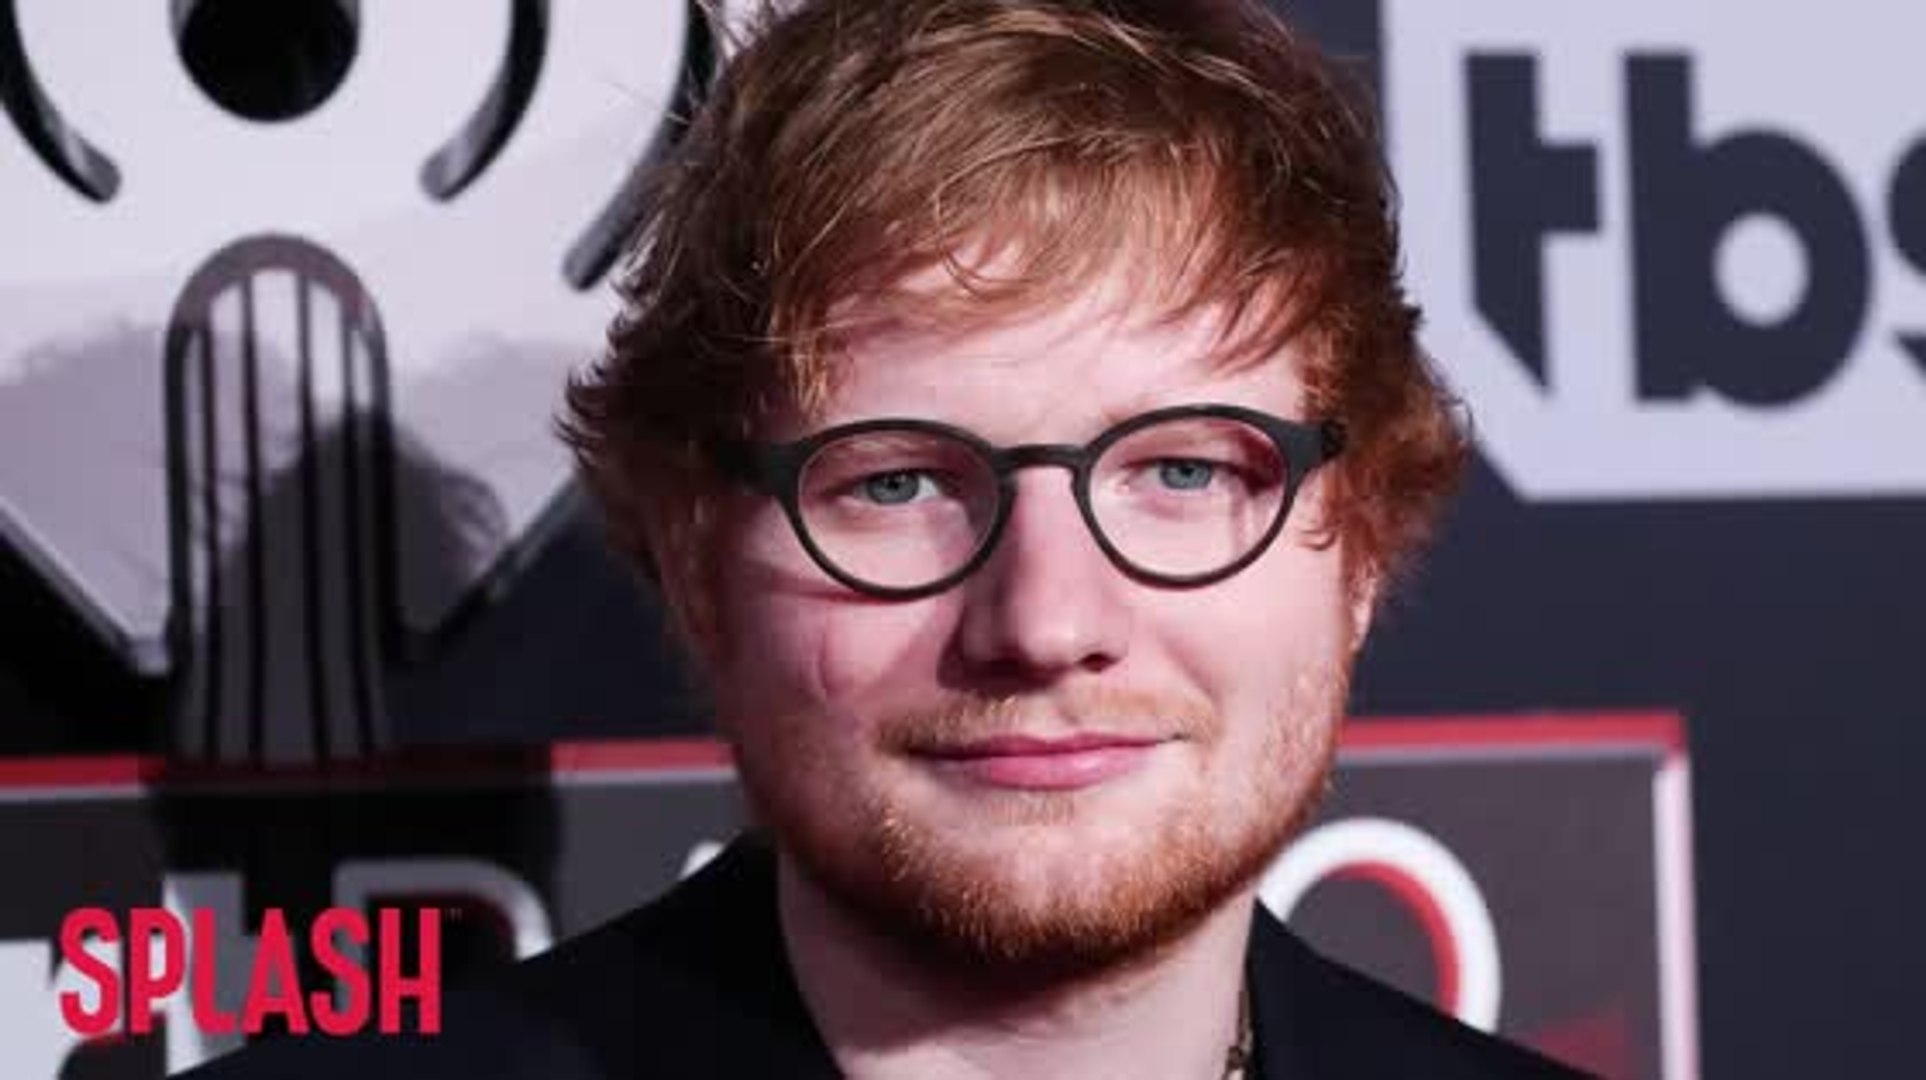 Fans Hated Ed Sheeran's Cameo in Game of Thrones